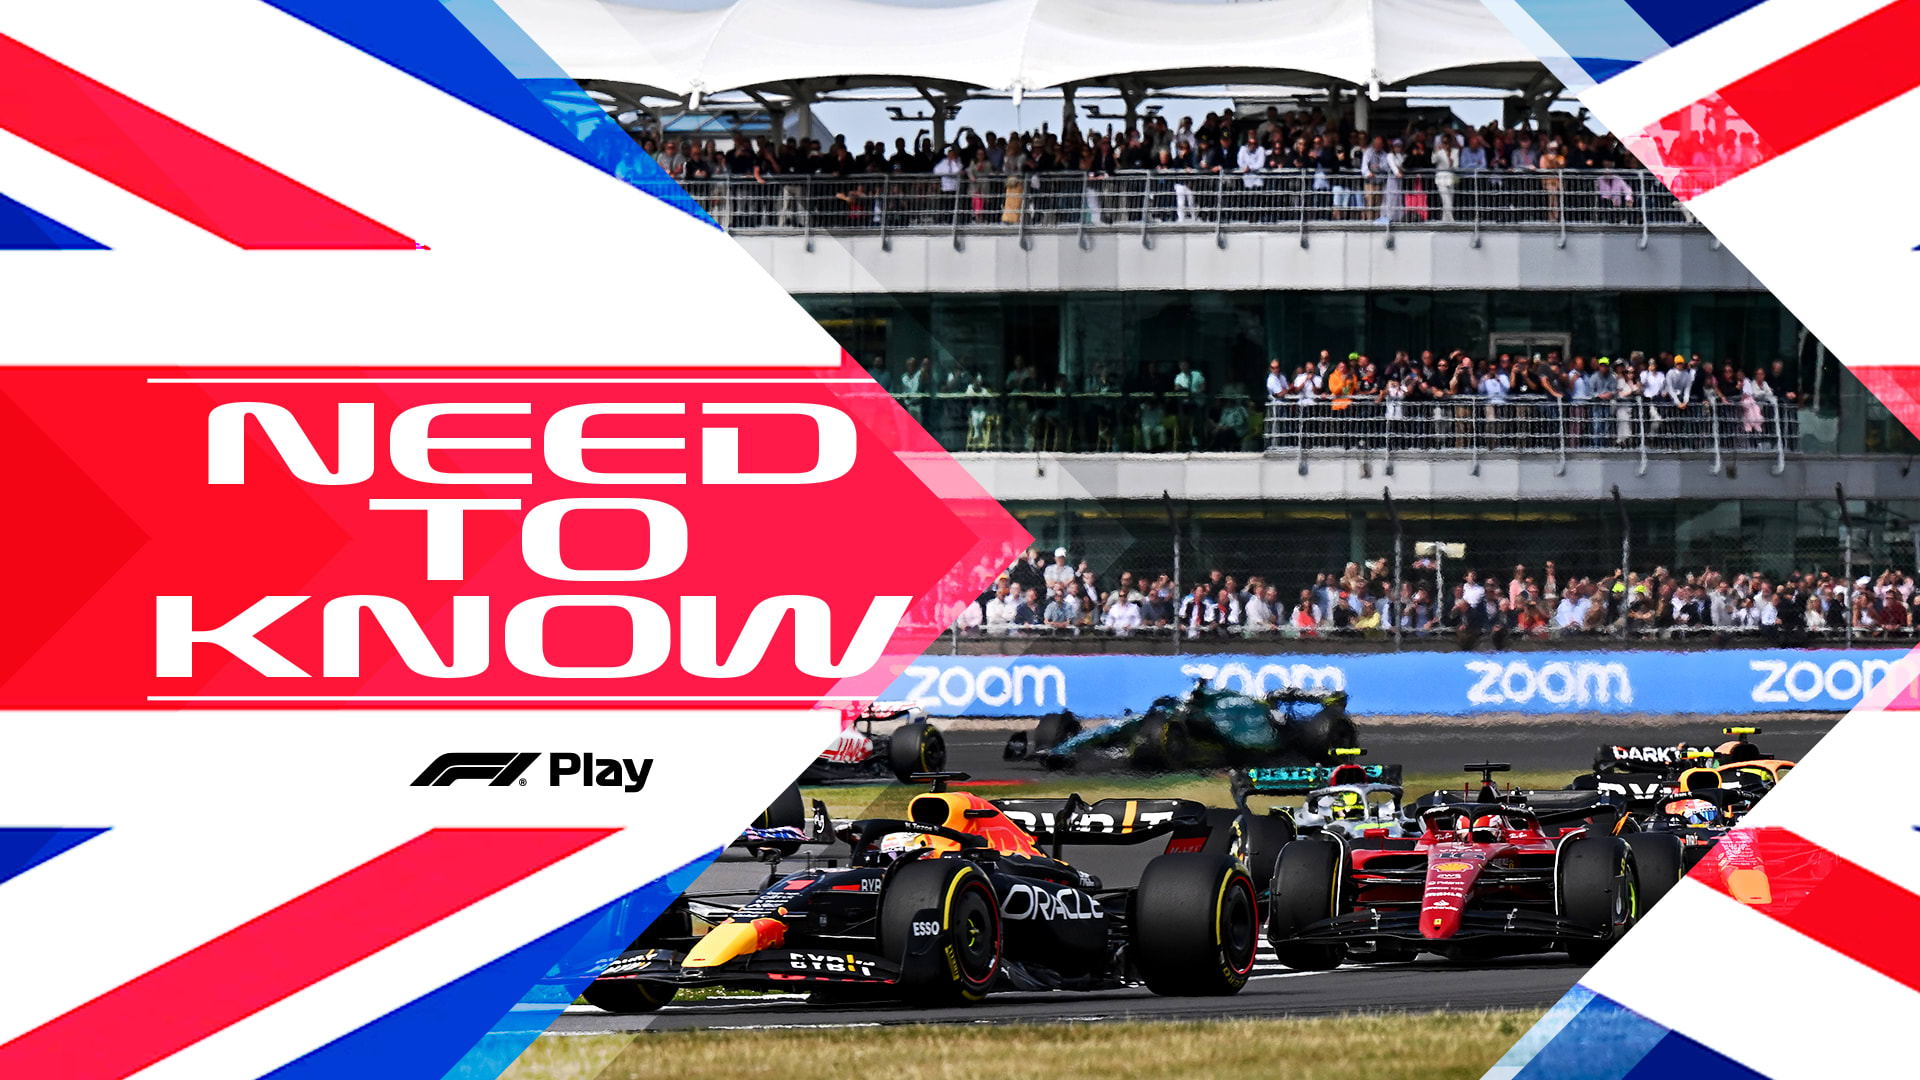 NEED TO KNOW The most important facts, stats and trivia ahead of the 2023 British Grand Prix Formula 1®